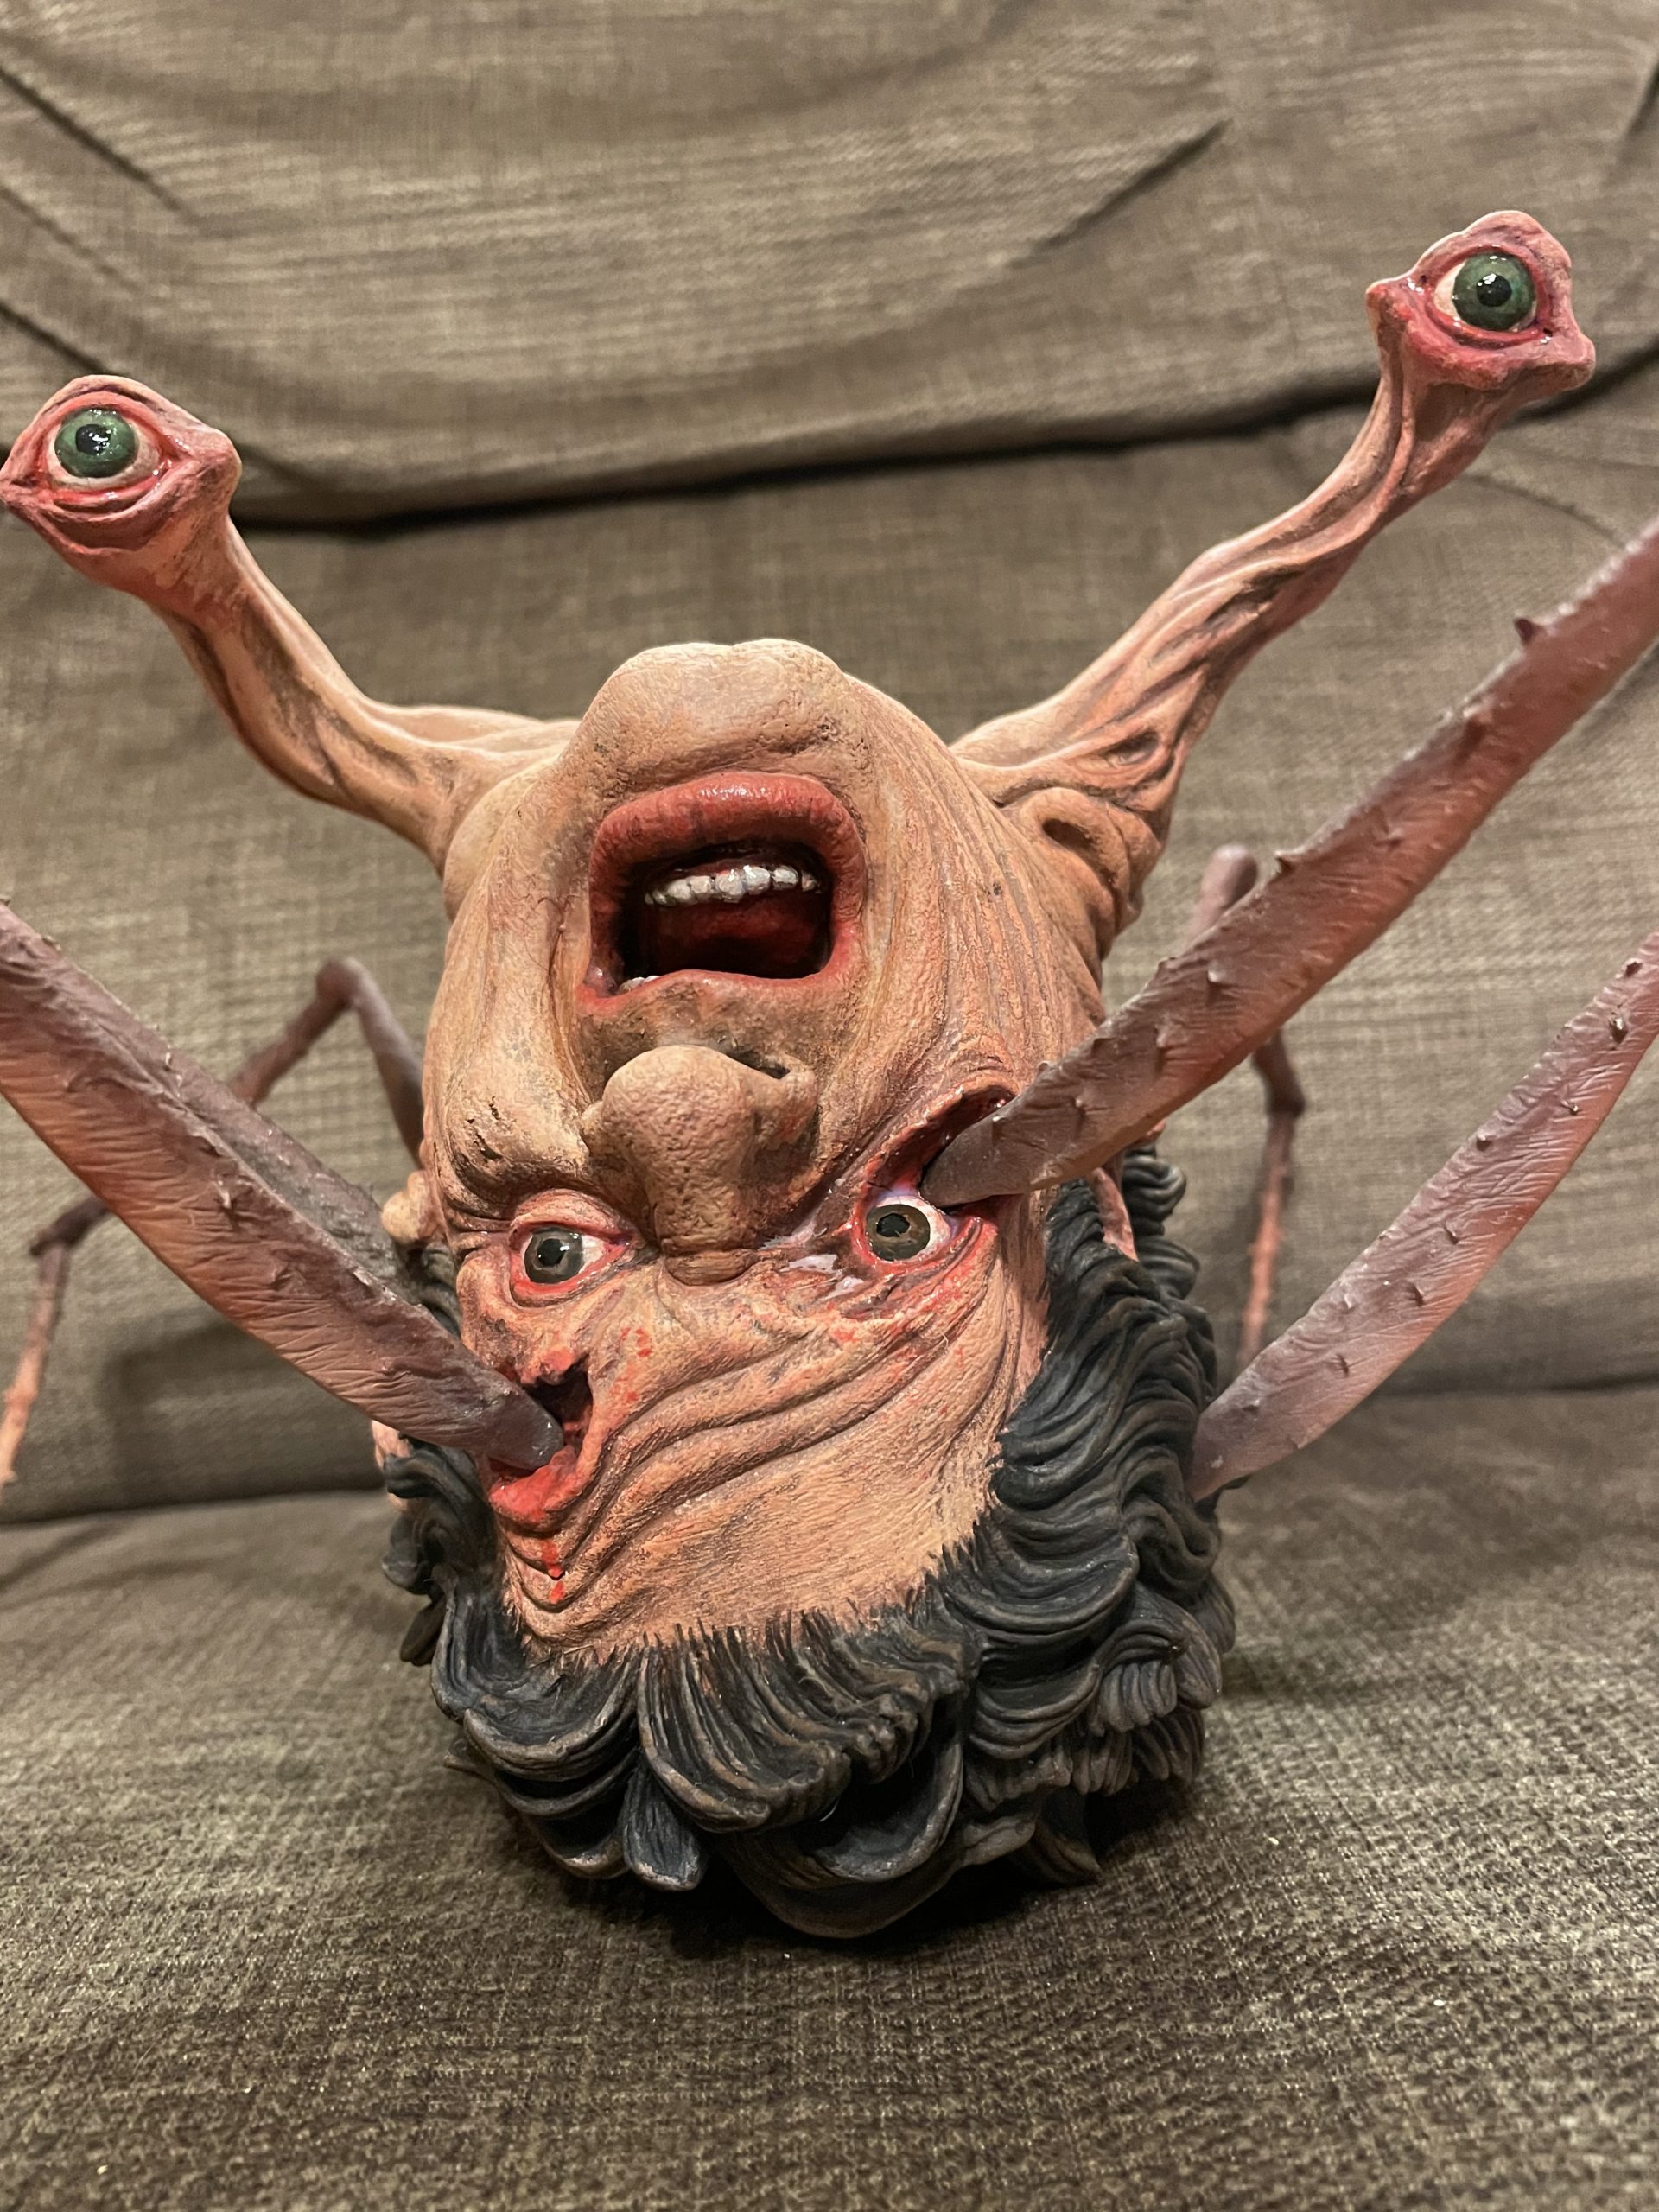 Spider-Head, Spider-Head…” – Repainting “The Thing” – LinWorkman.com